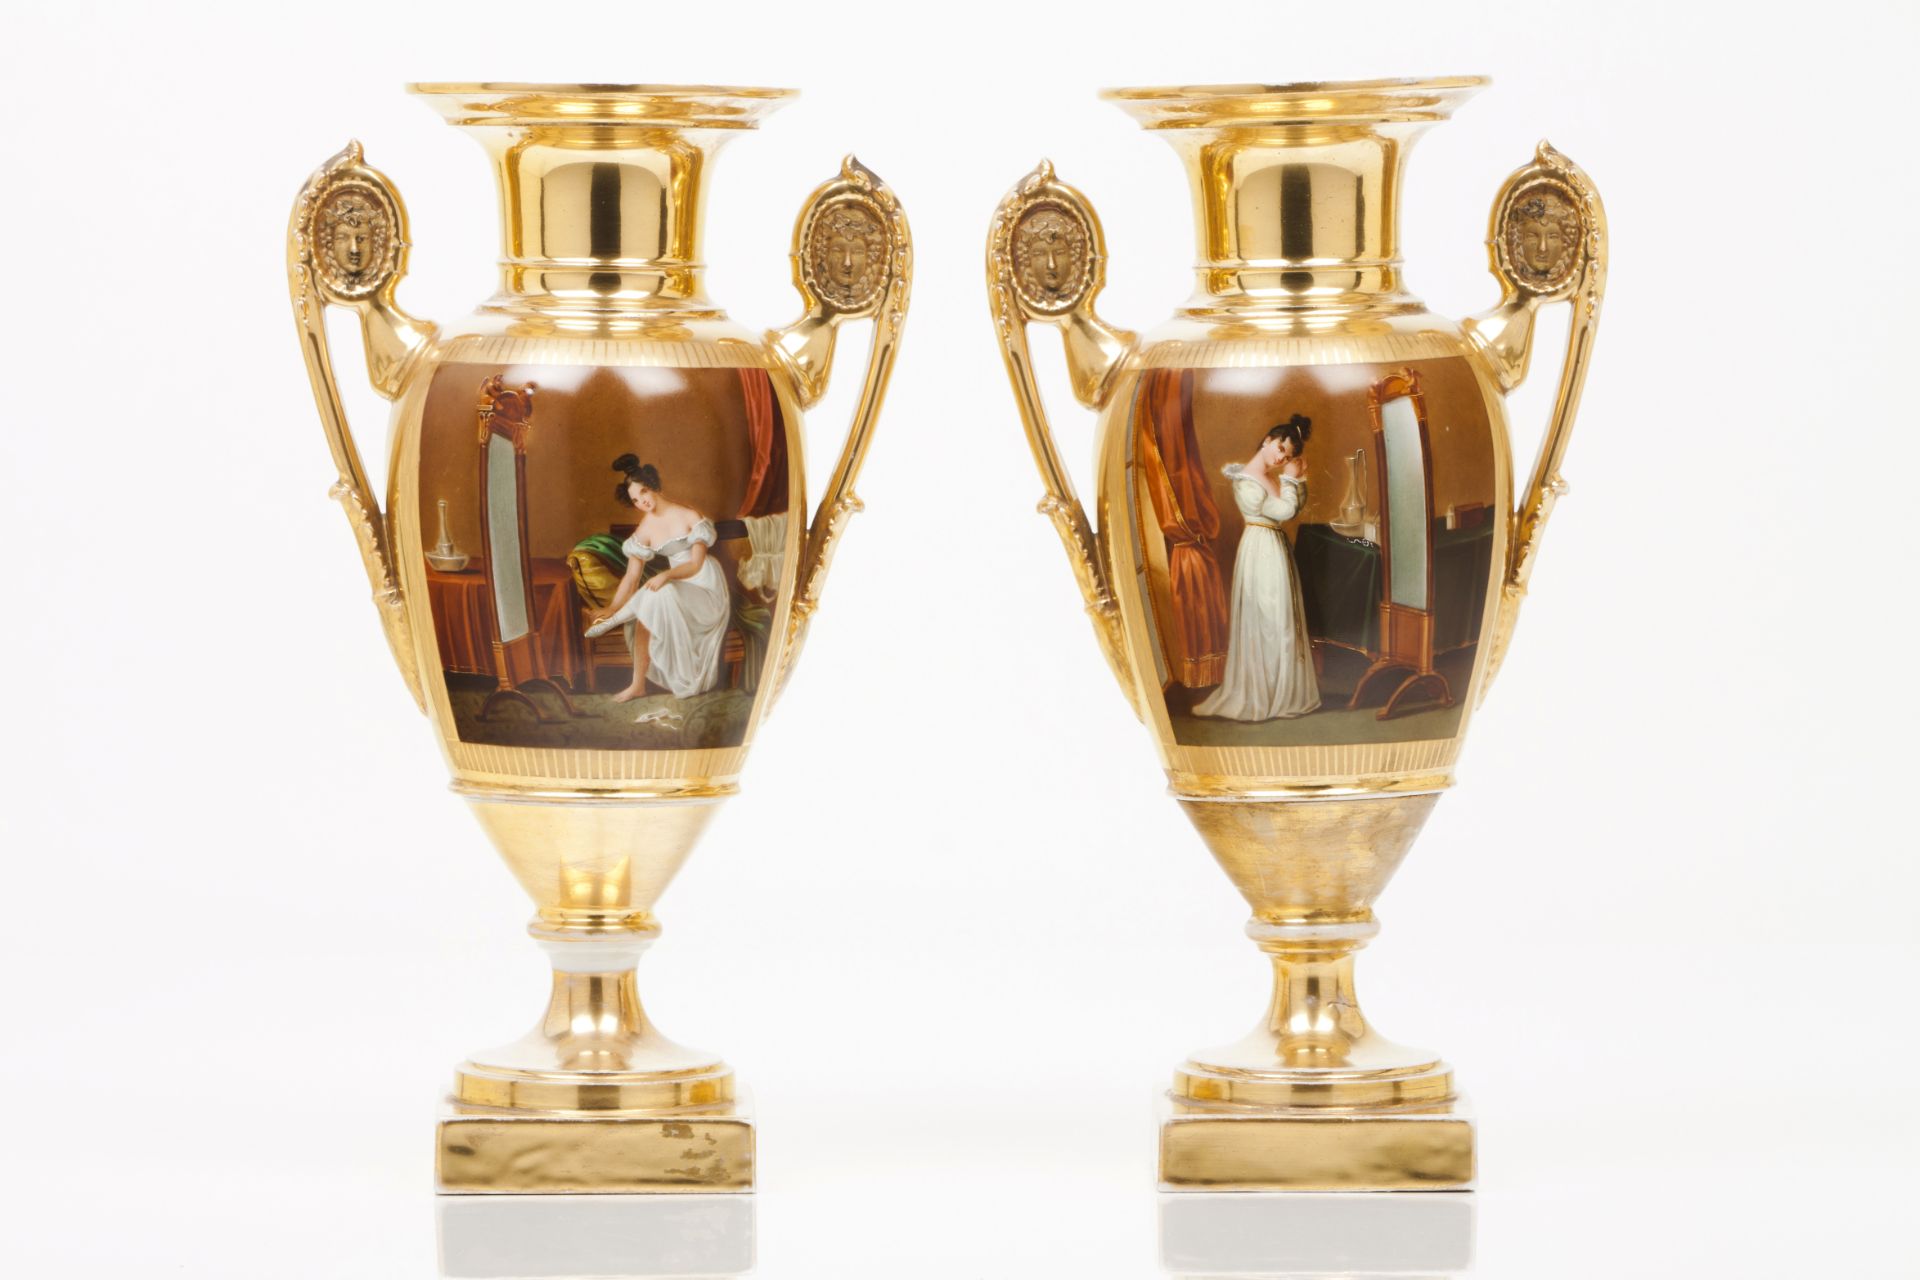 A pair of Empire vasesFrench porcelain Gilt and painted decoration depicting domestic scenes with